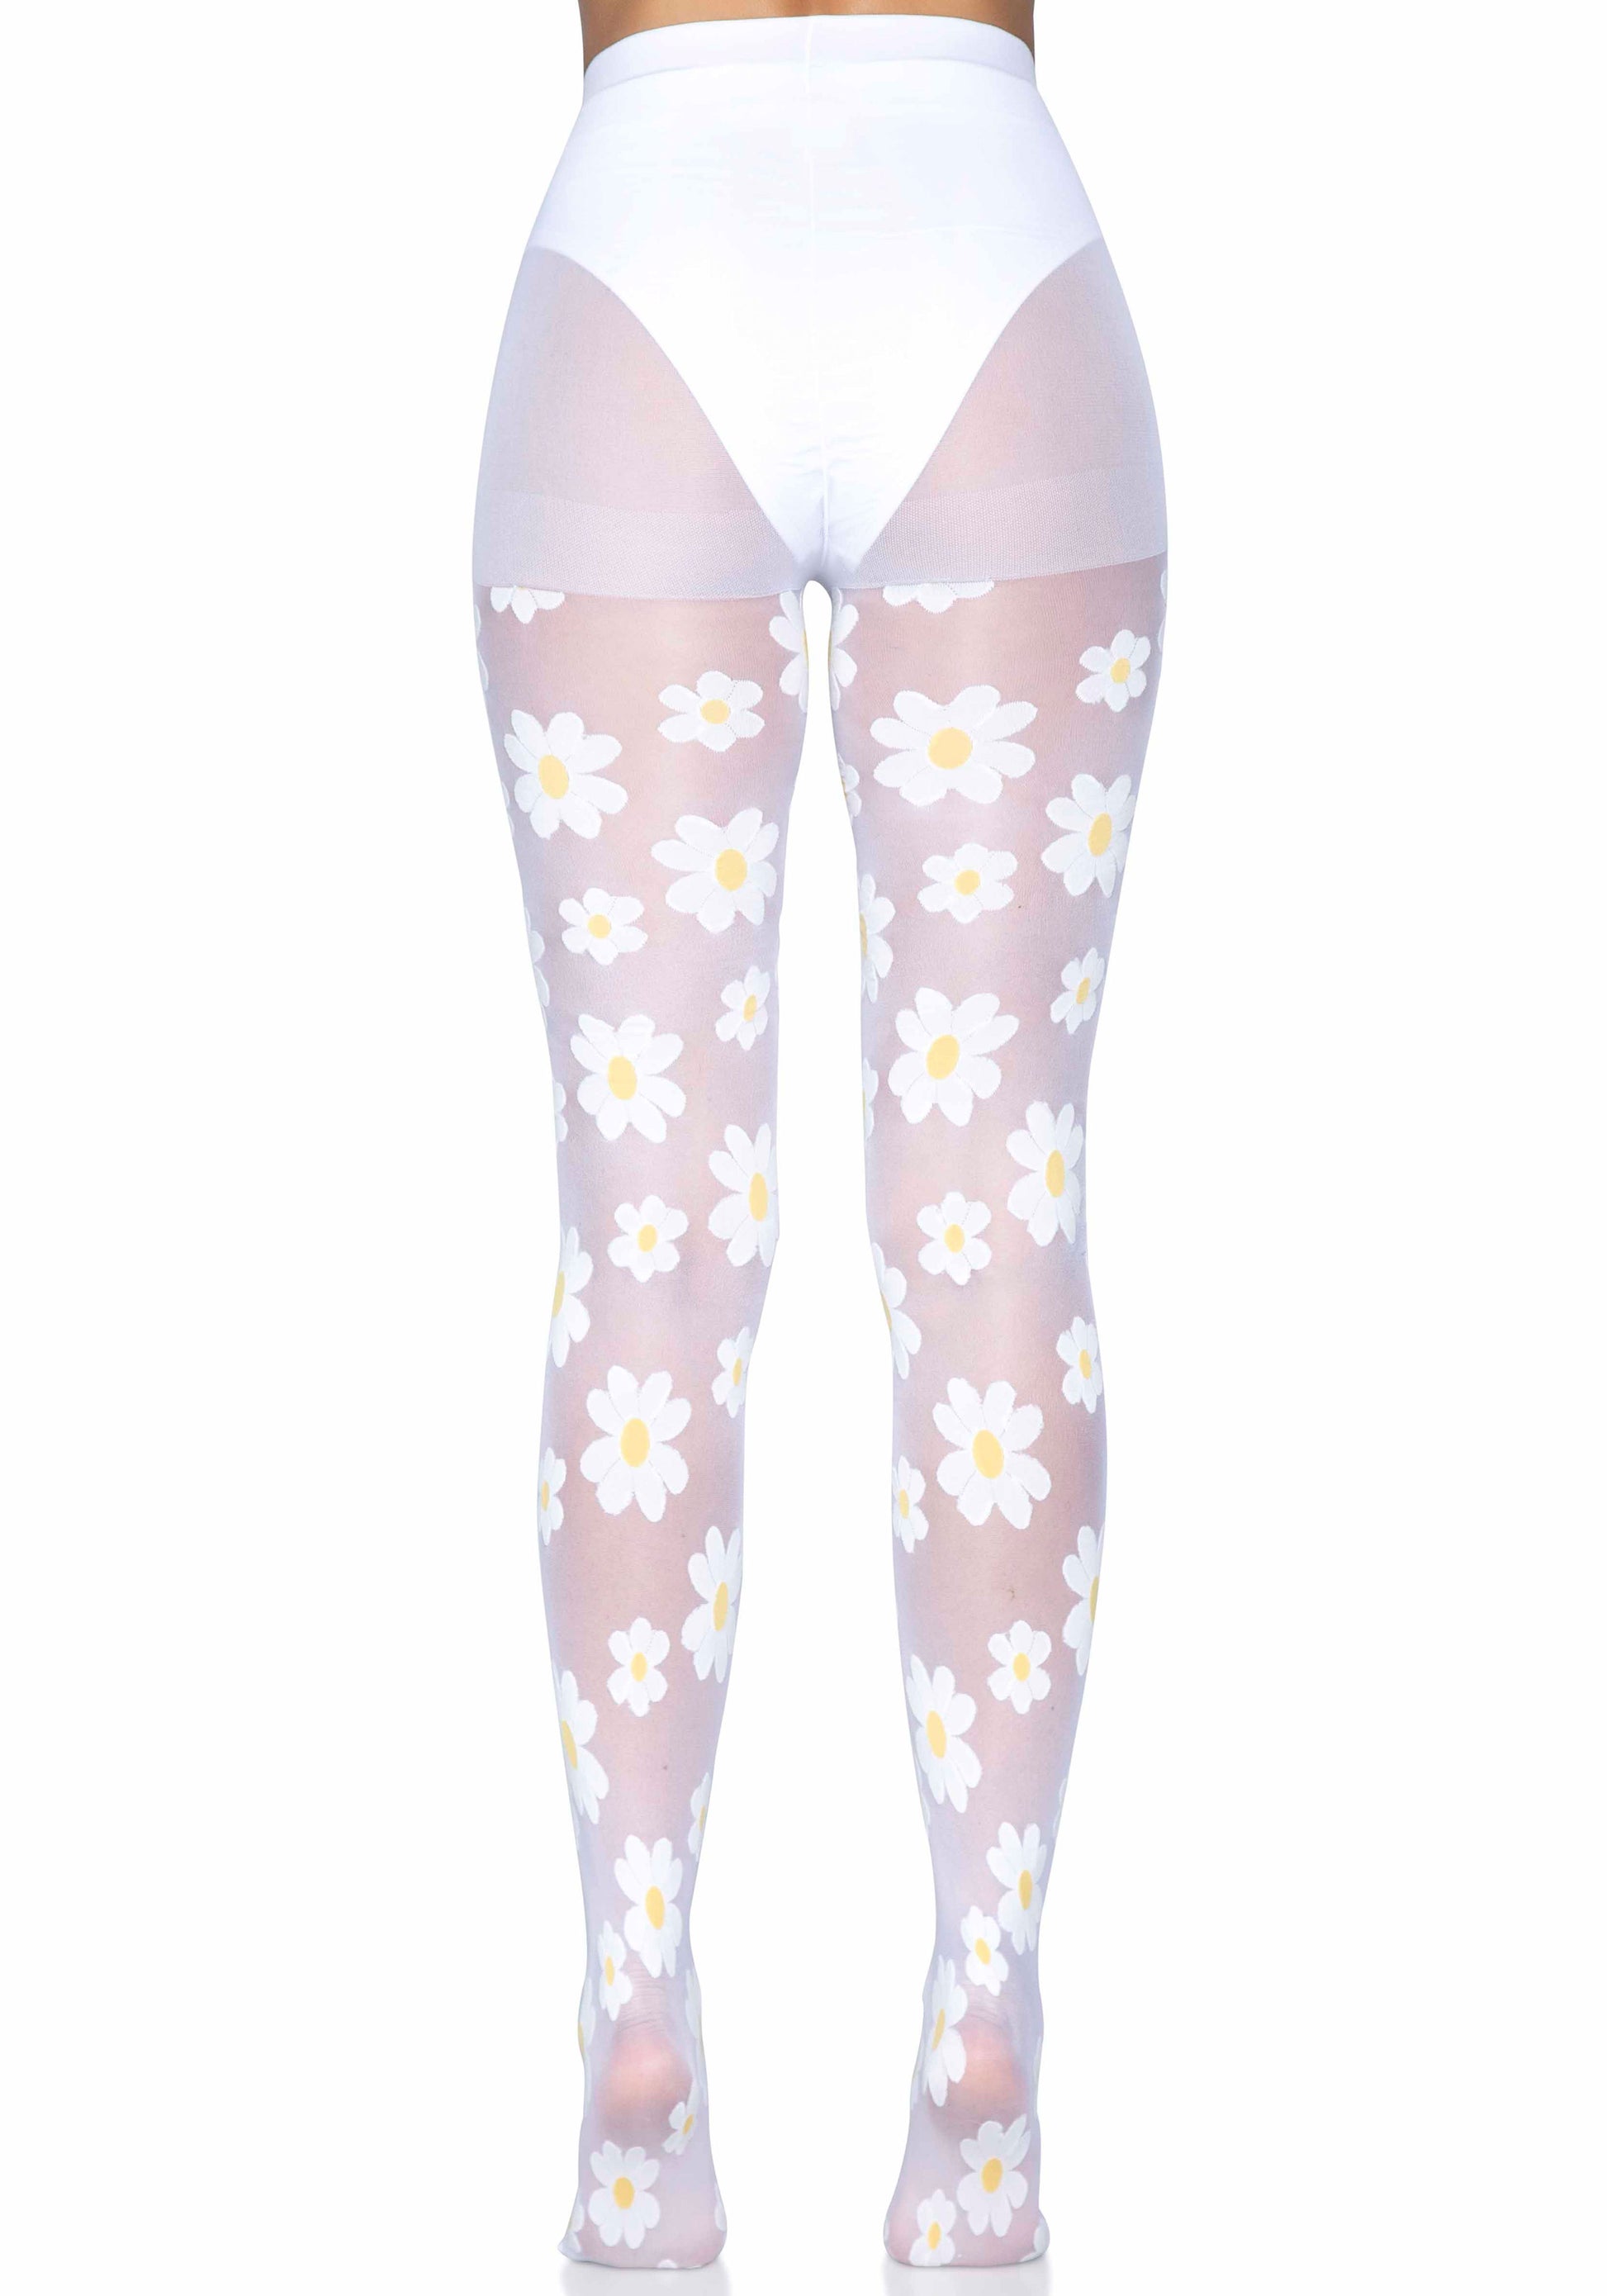 Leg Avenue 7752 Sheer white tights with a woven daisy flower pattern.